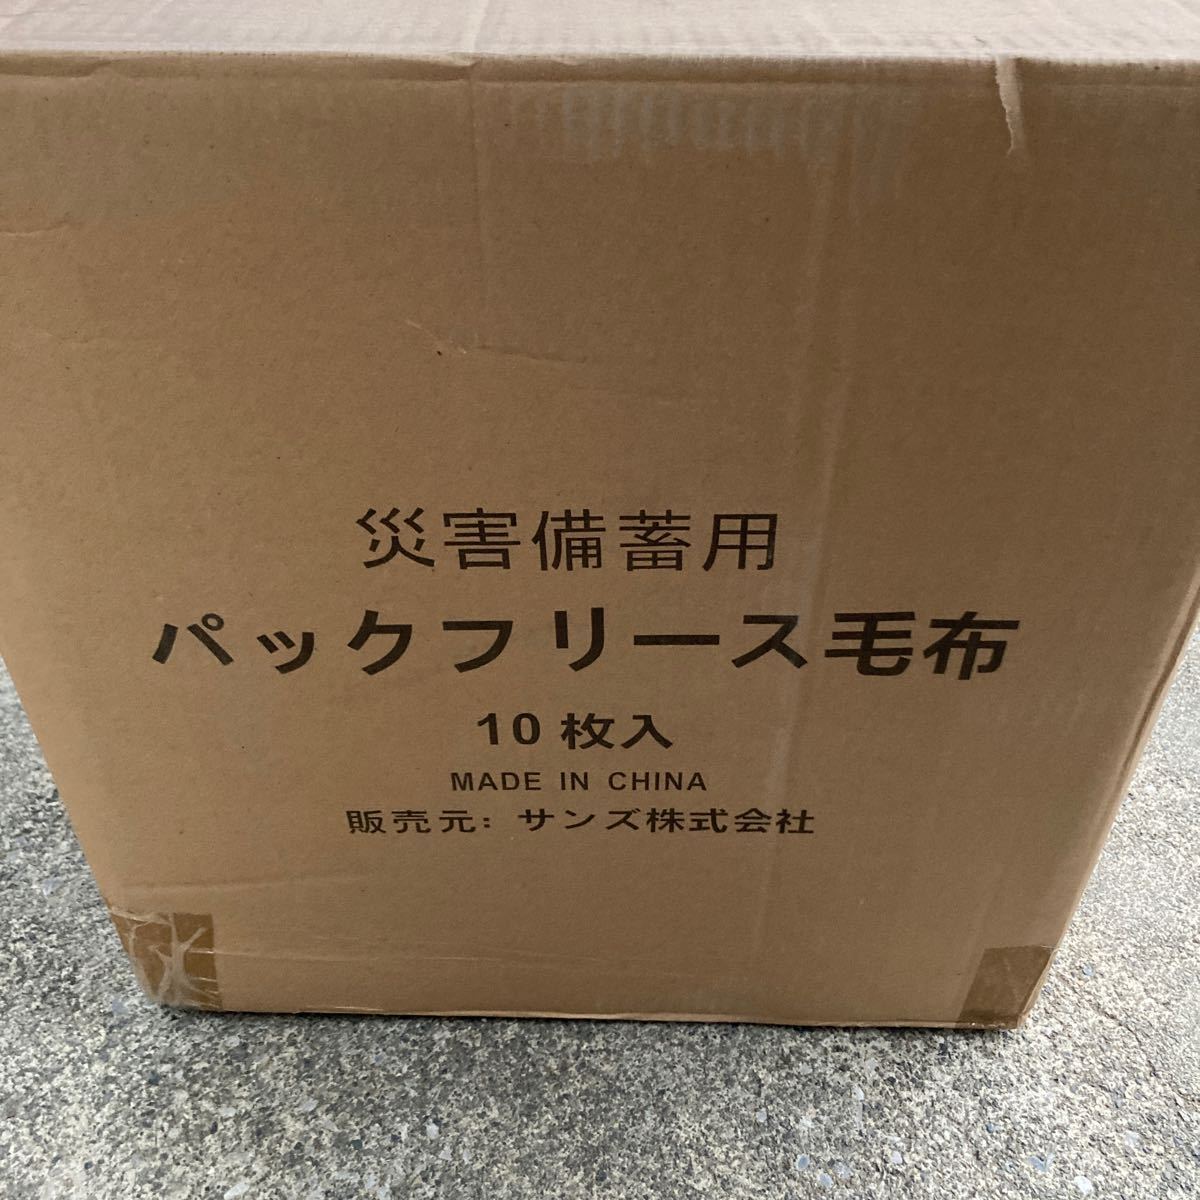 [1 box 10 sheets ] disaster strategic reserve for pack blanket 10 pieces set 1 box disaster prevention sun z corporation company enterprise home use vacuum pack 